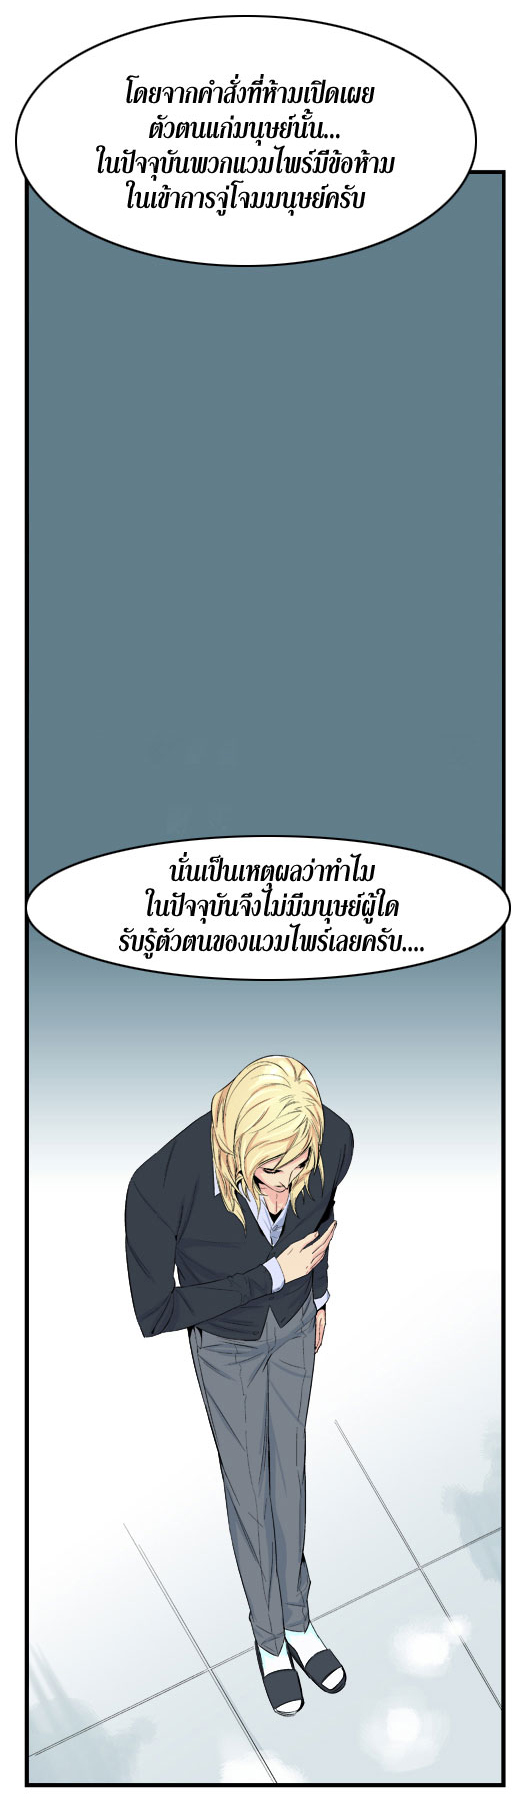 Noblesse 18 020